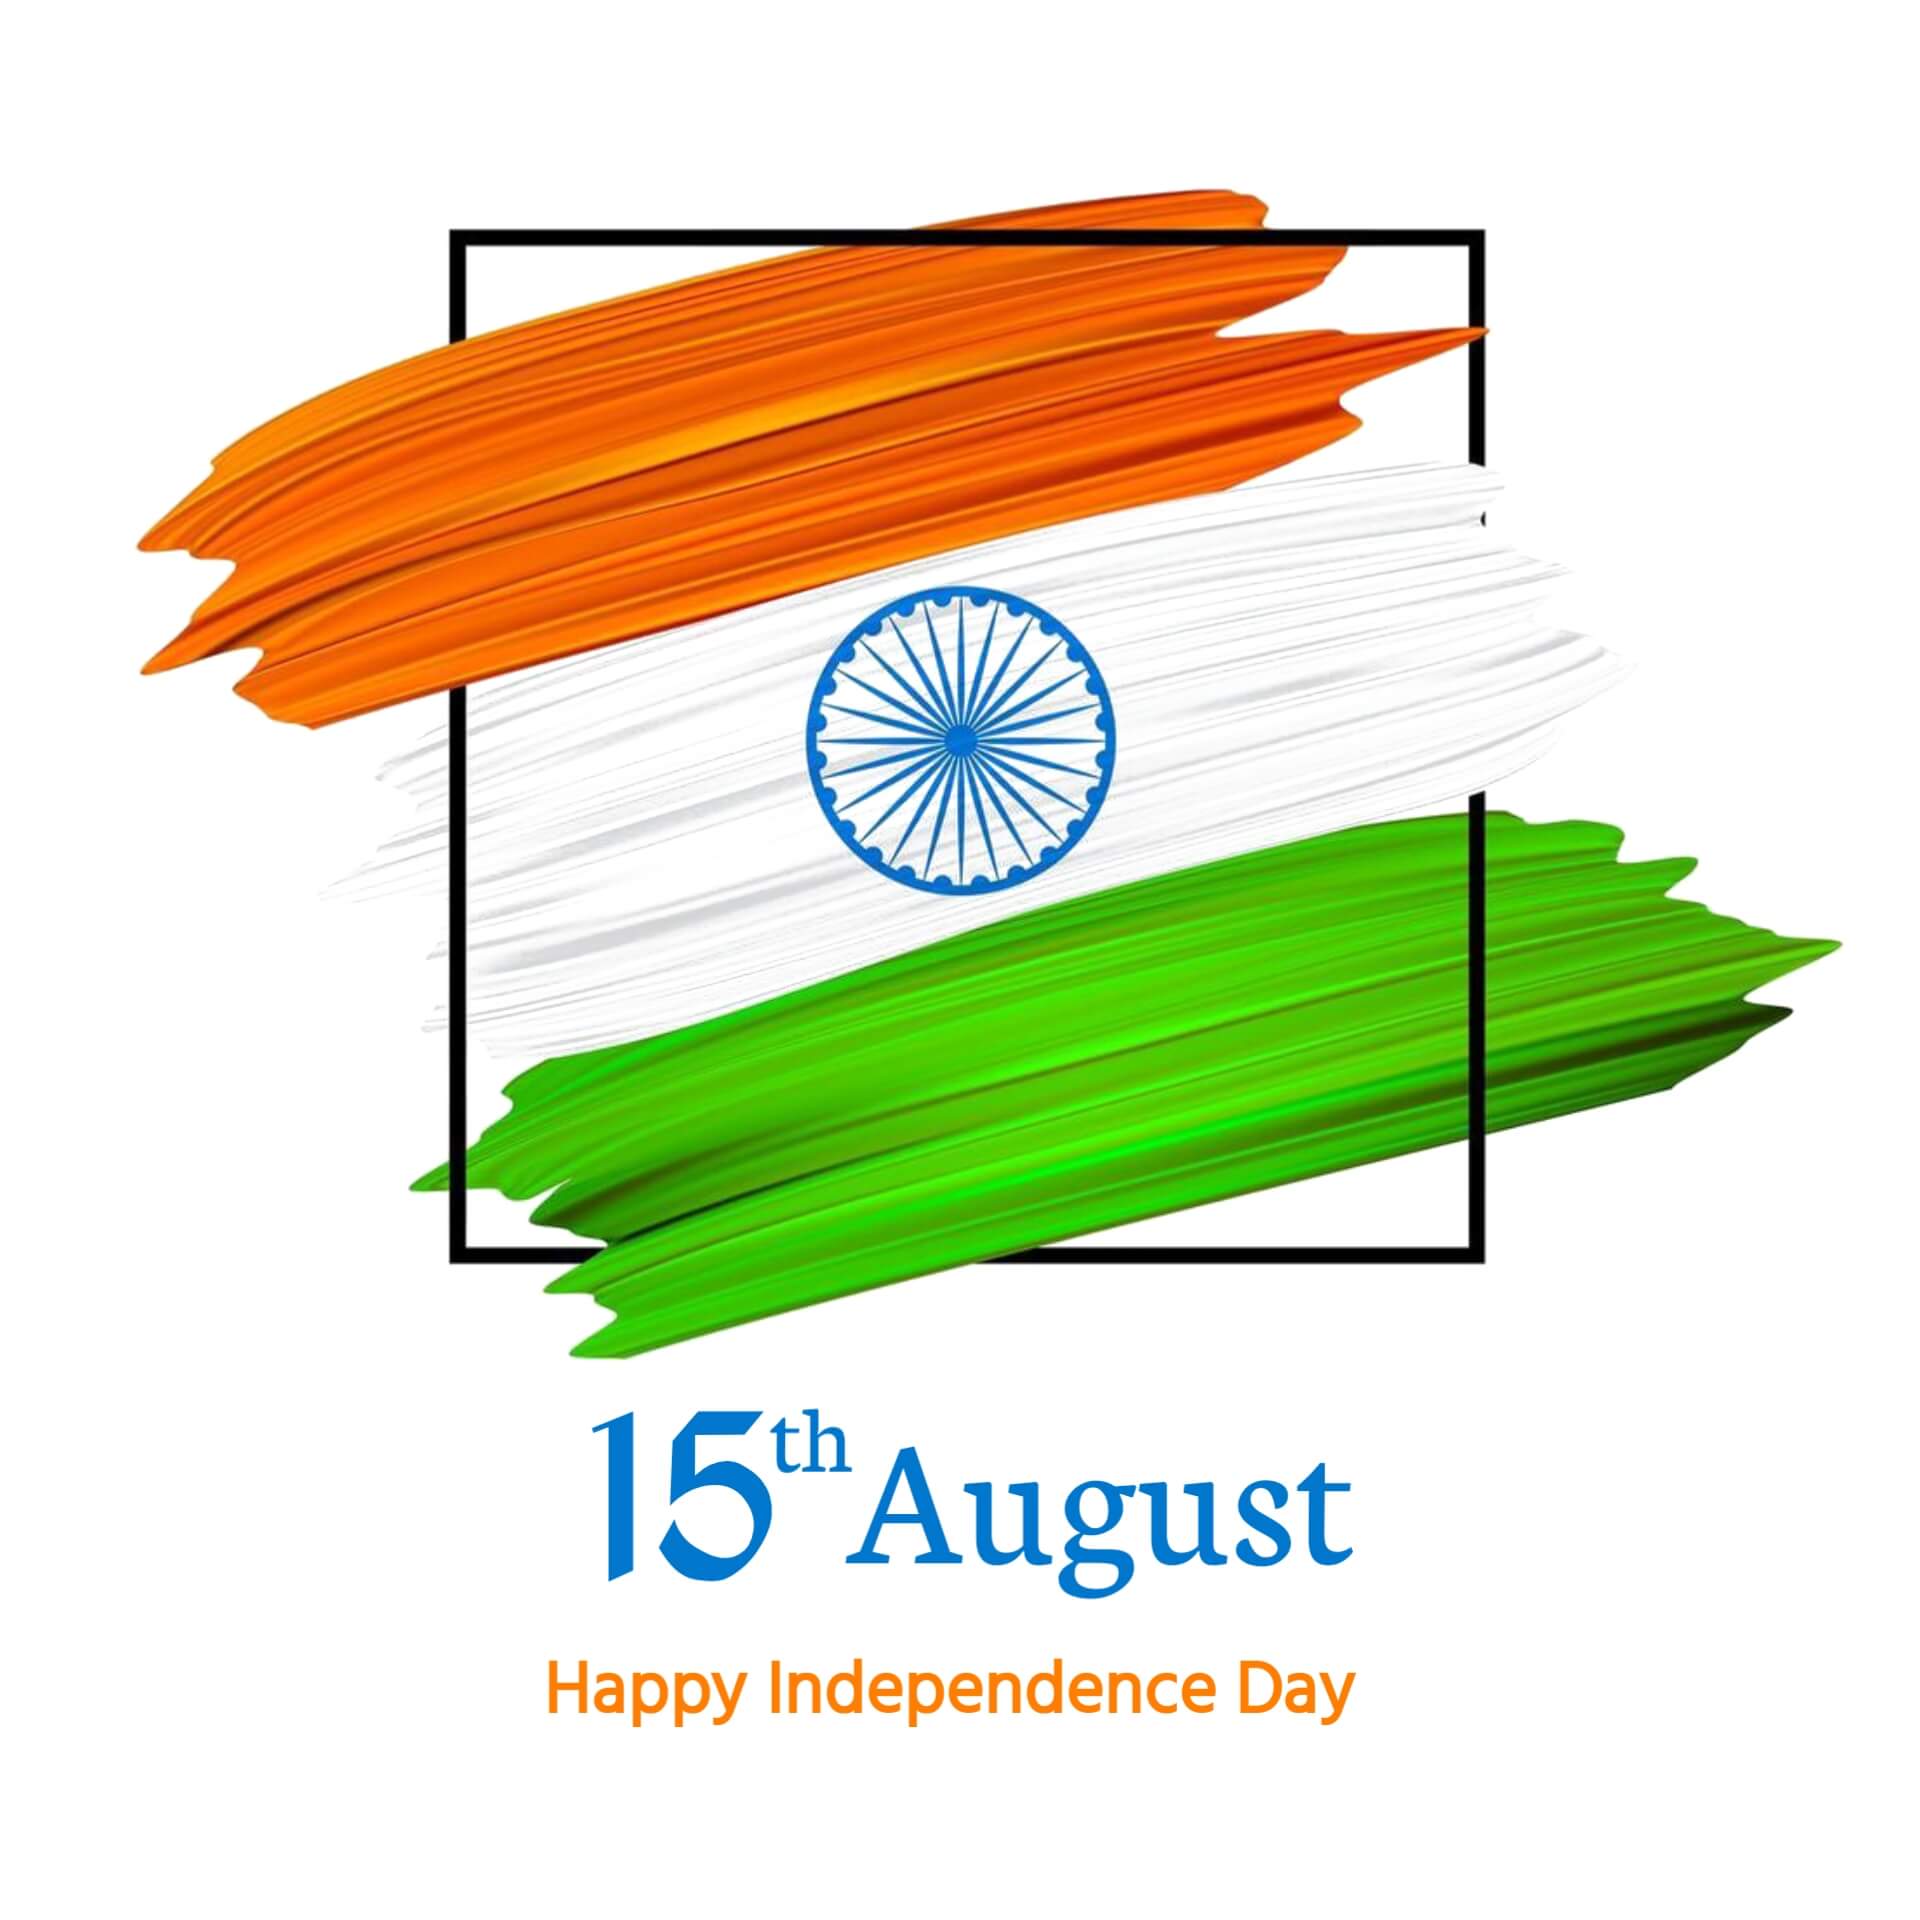 15th August Independence Day Image